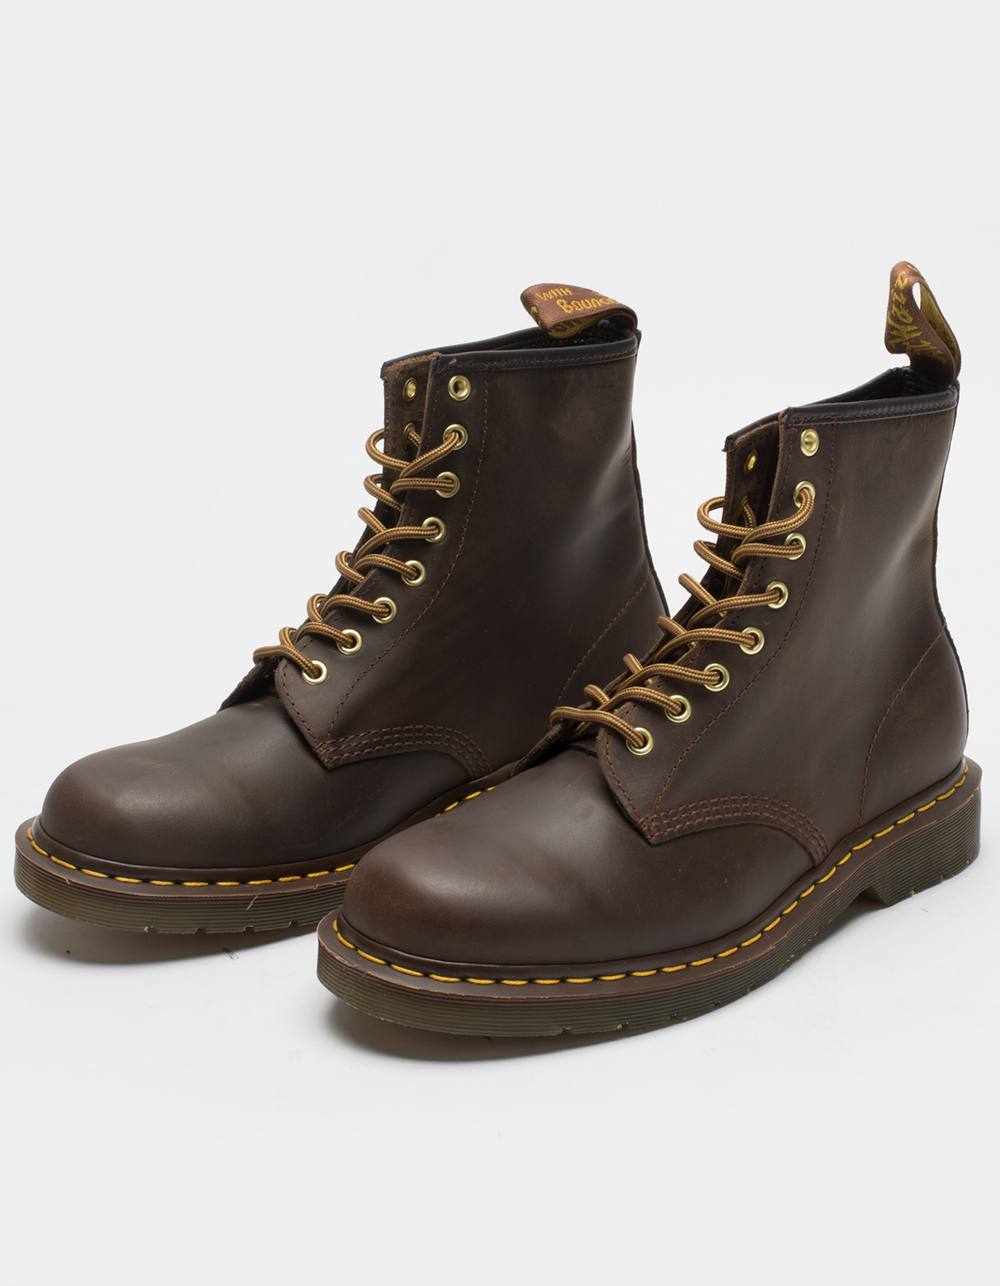 Salida Perpetuo patrulla DR MARTENS 1460 Crazy Horse Leather Lace Up Mens Boots - BROWN | Tillys